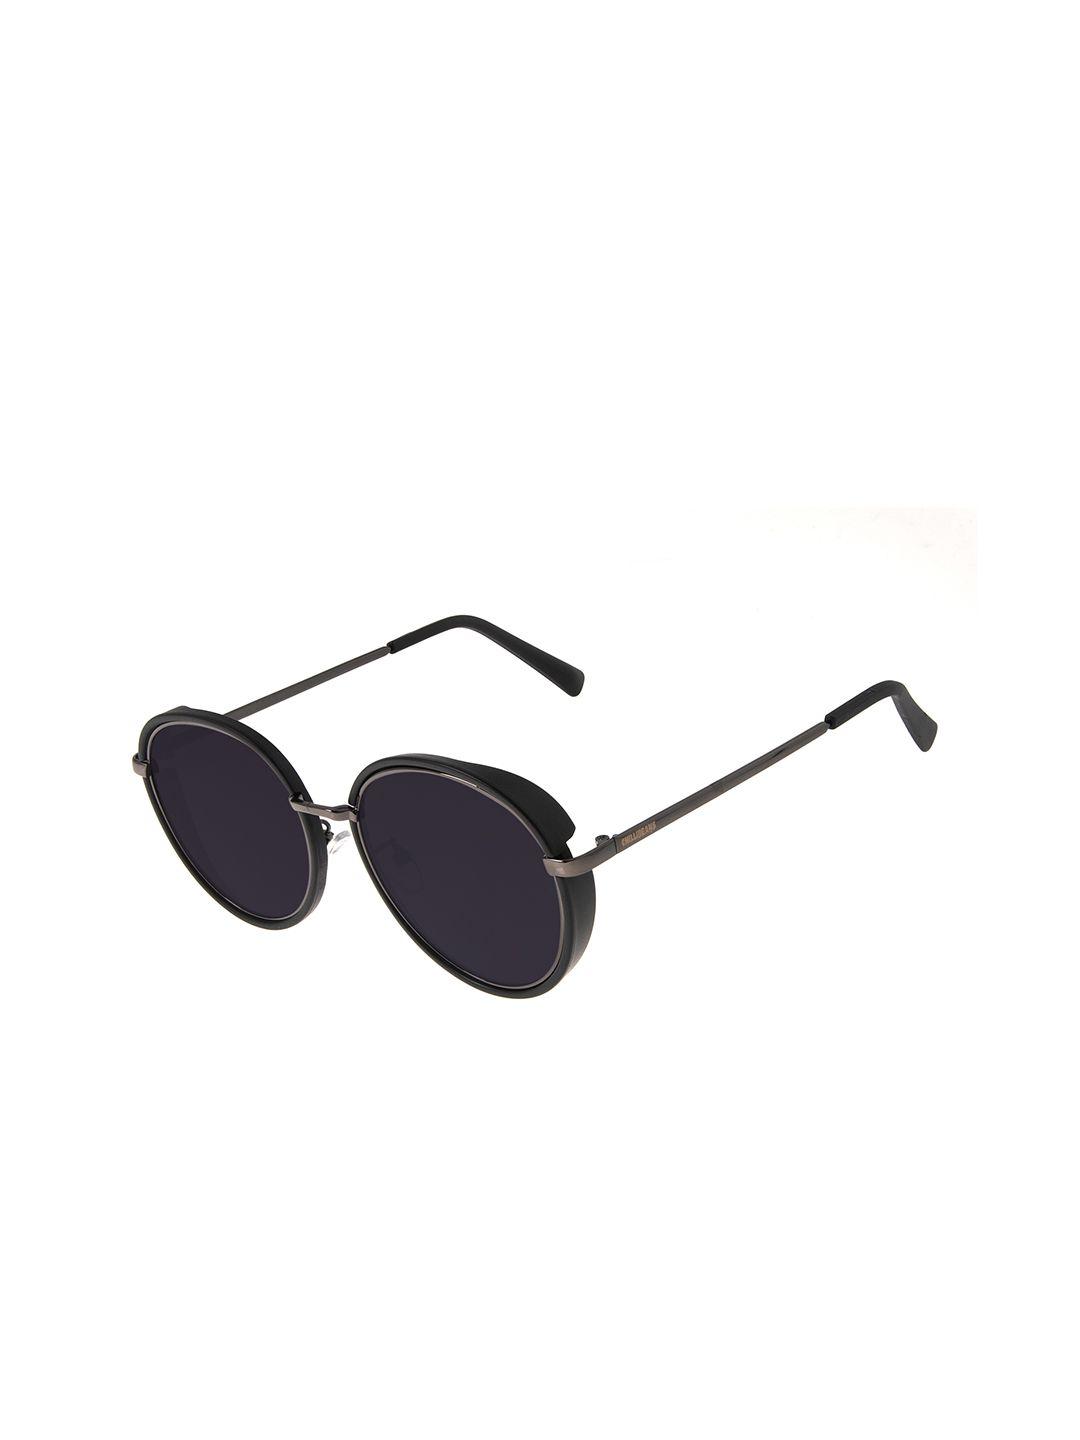 chilli-beans-women-black-lens-&-black-round-sunglasses-with-uv-protected-lens-occl34810124